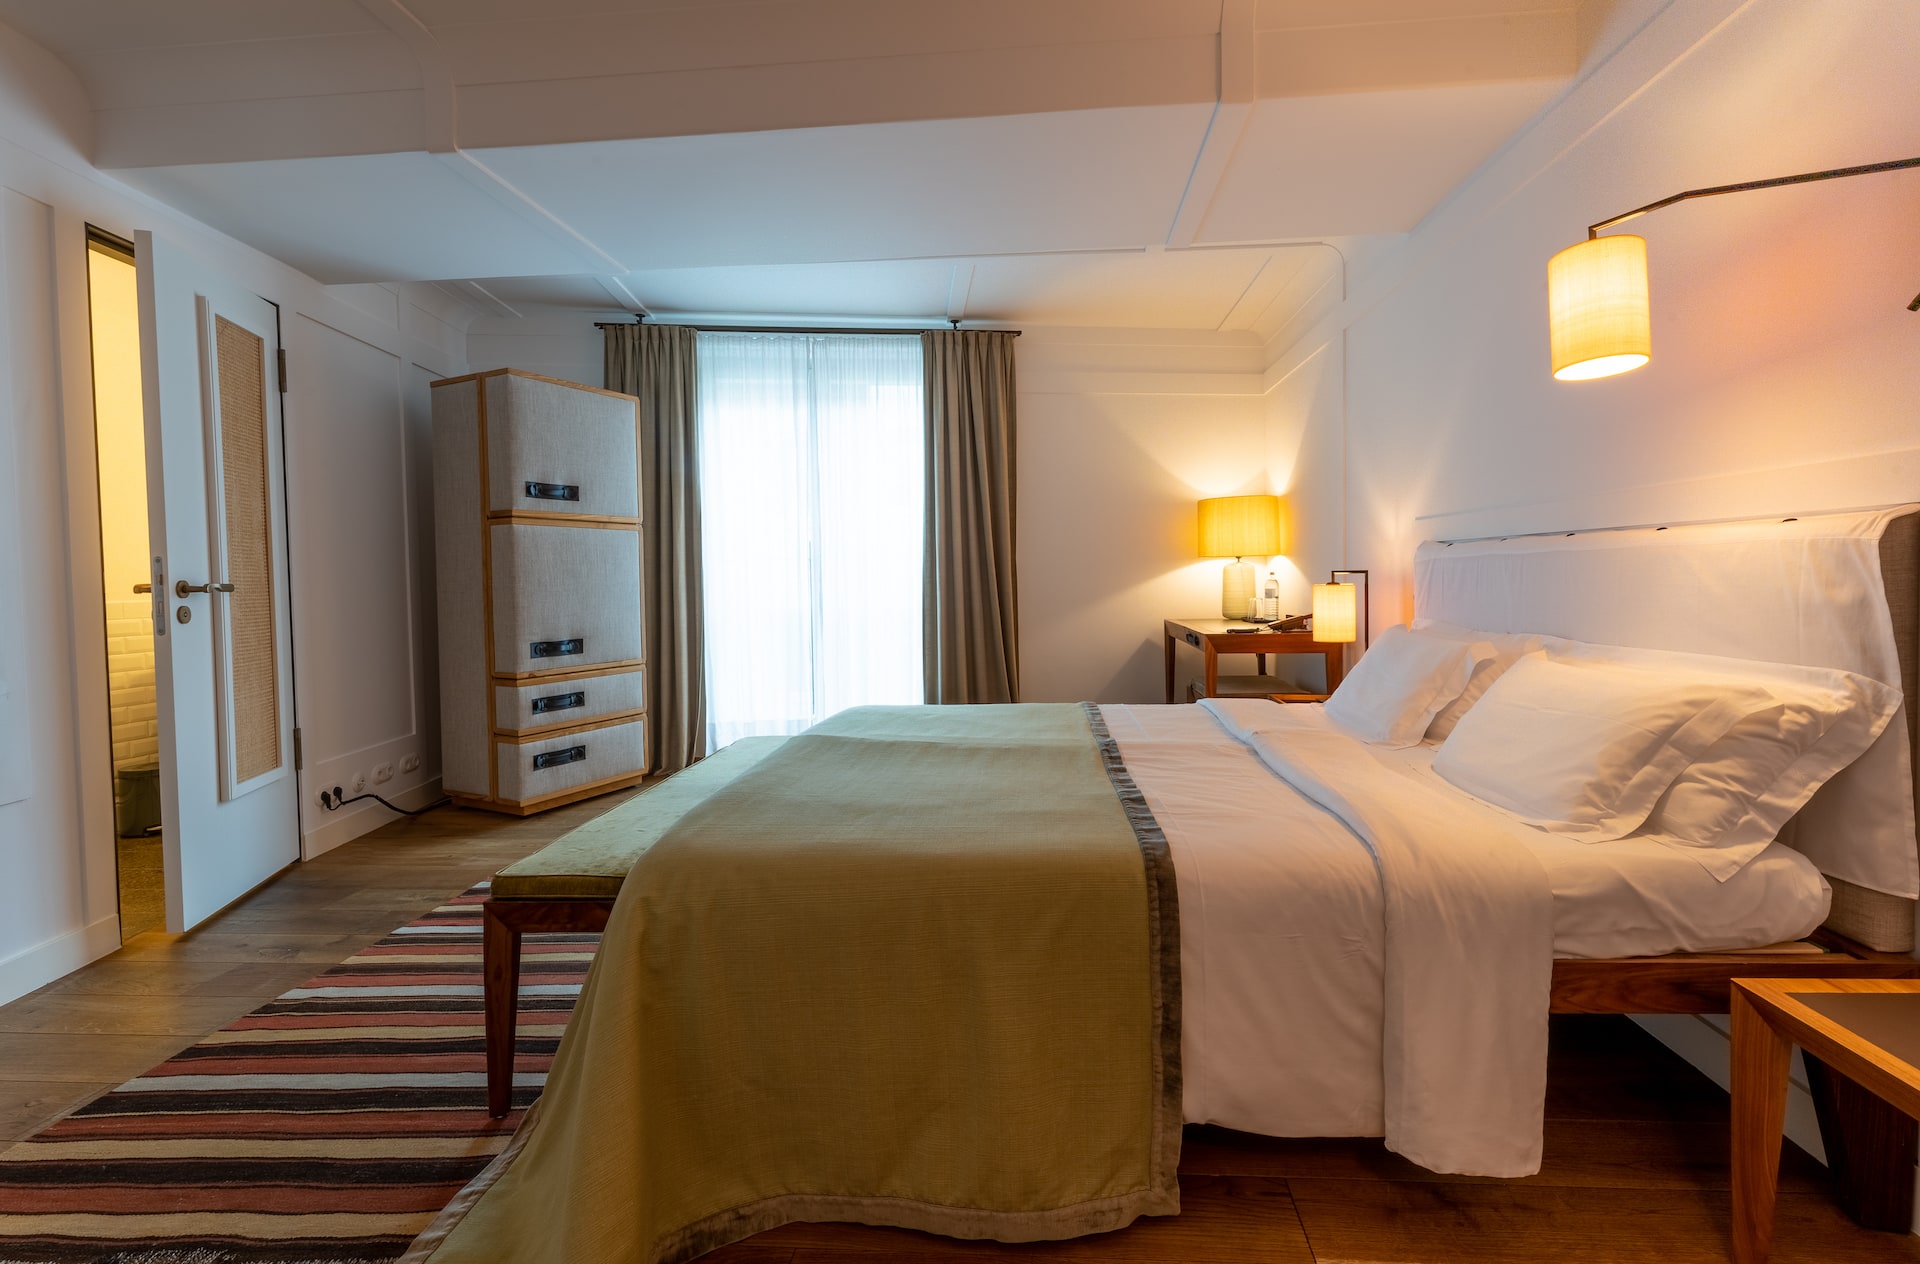 Superior room with a double bed at the LOUIS Hotel Munich